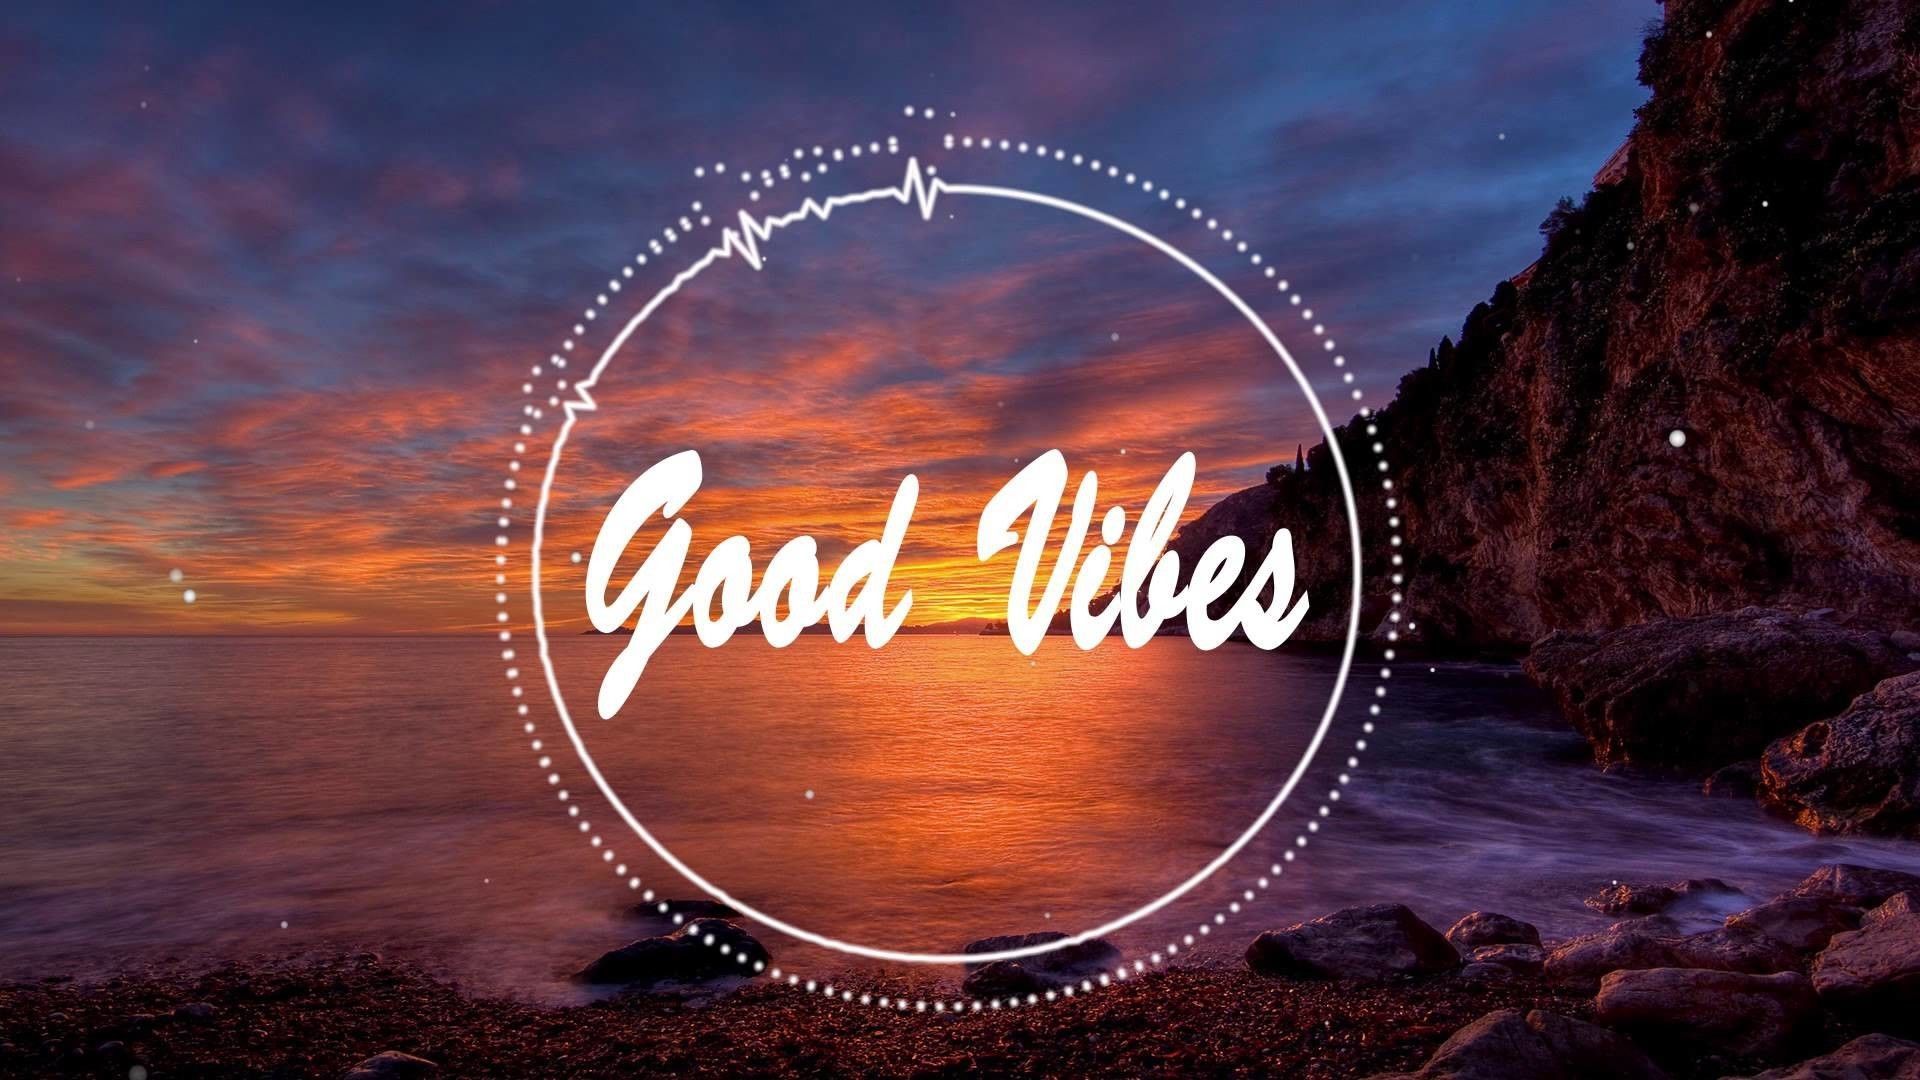 Good vibes wallpapers - 